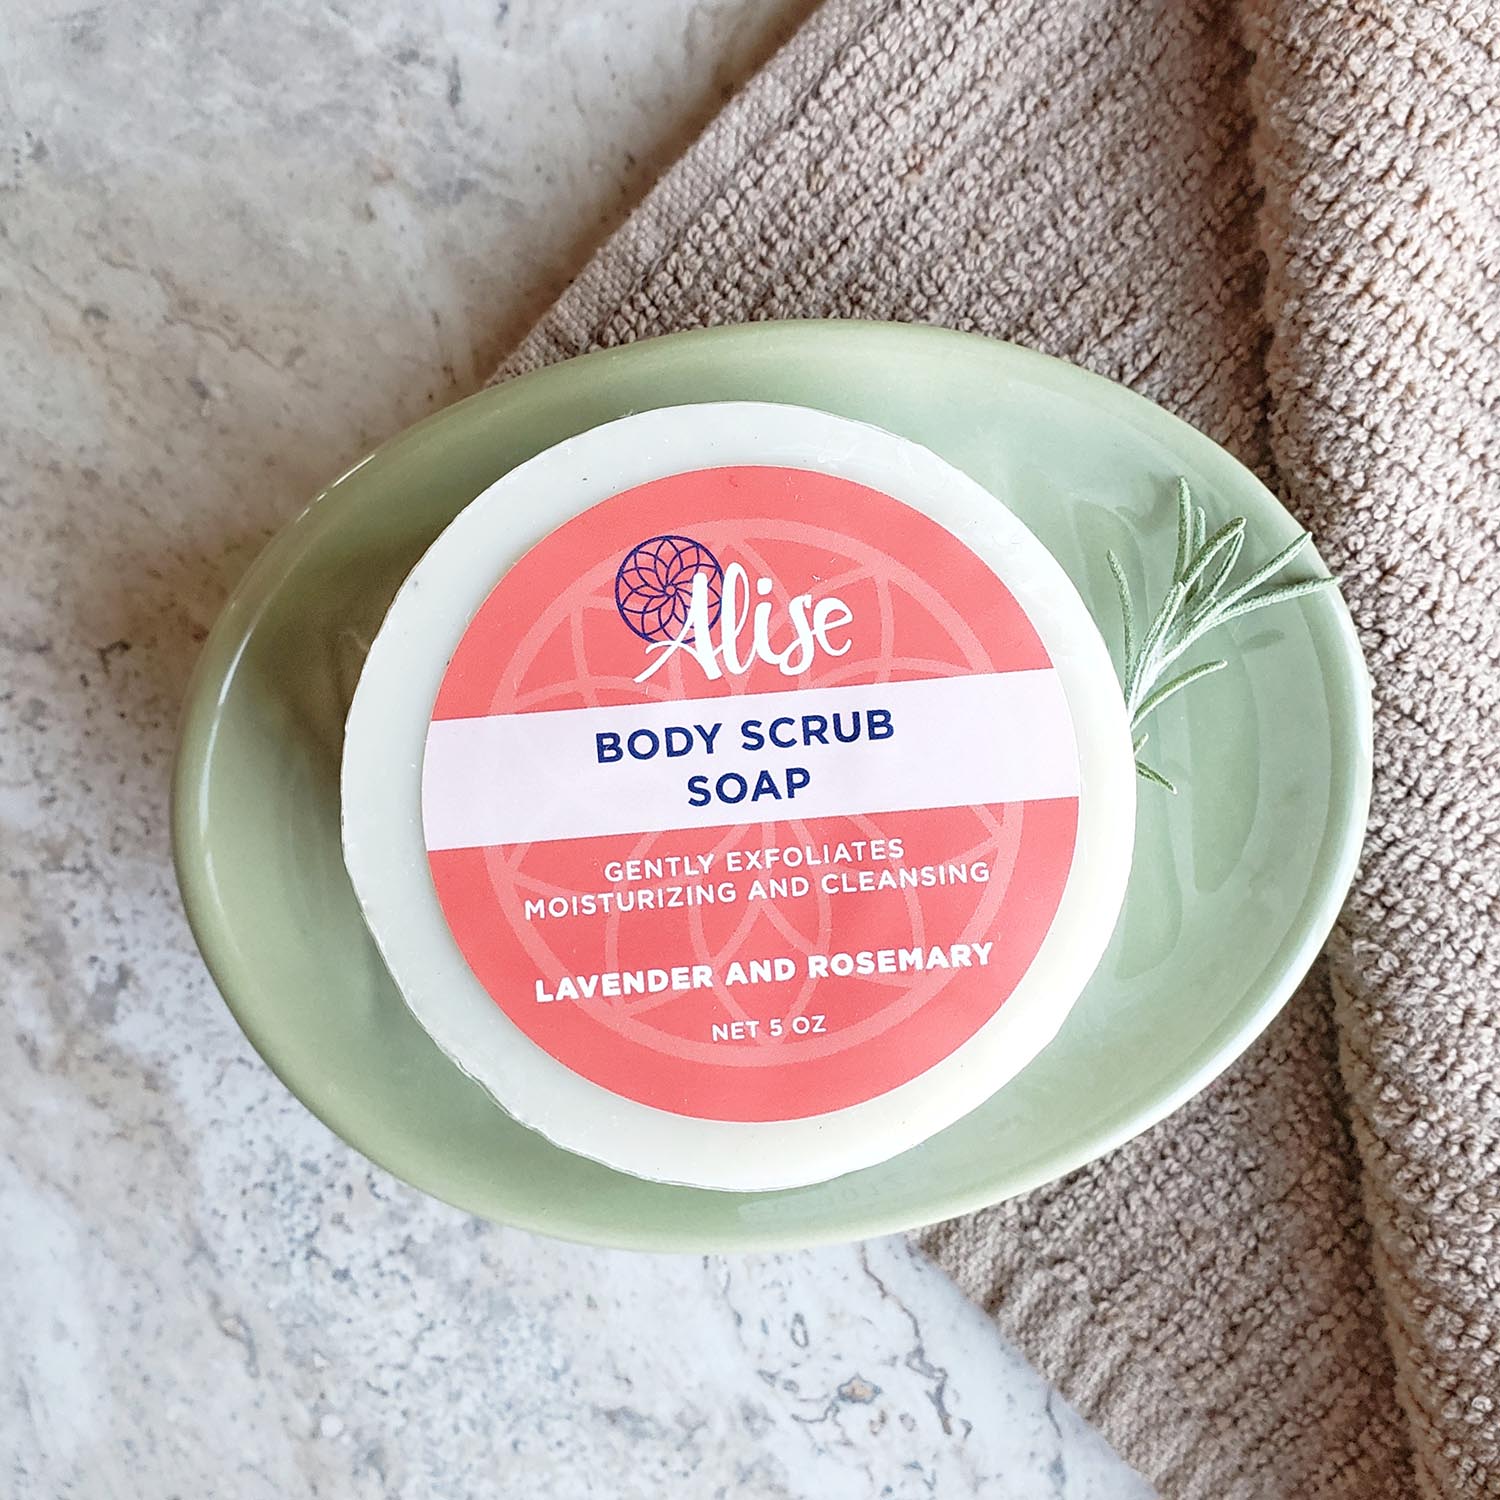 Body Scrub Soap 5oz Lavender/Rosemary EO handcrafted by Alise Body Care